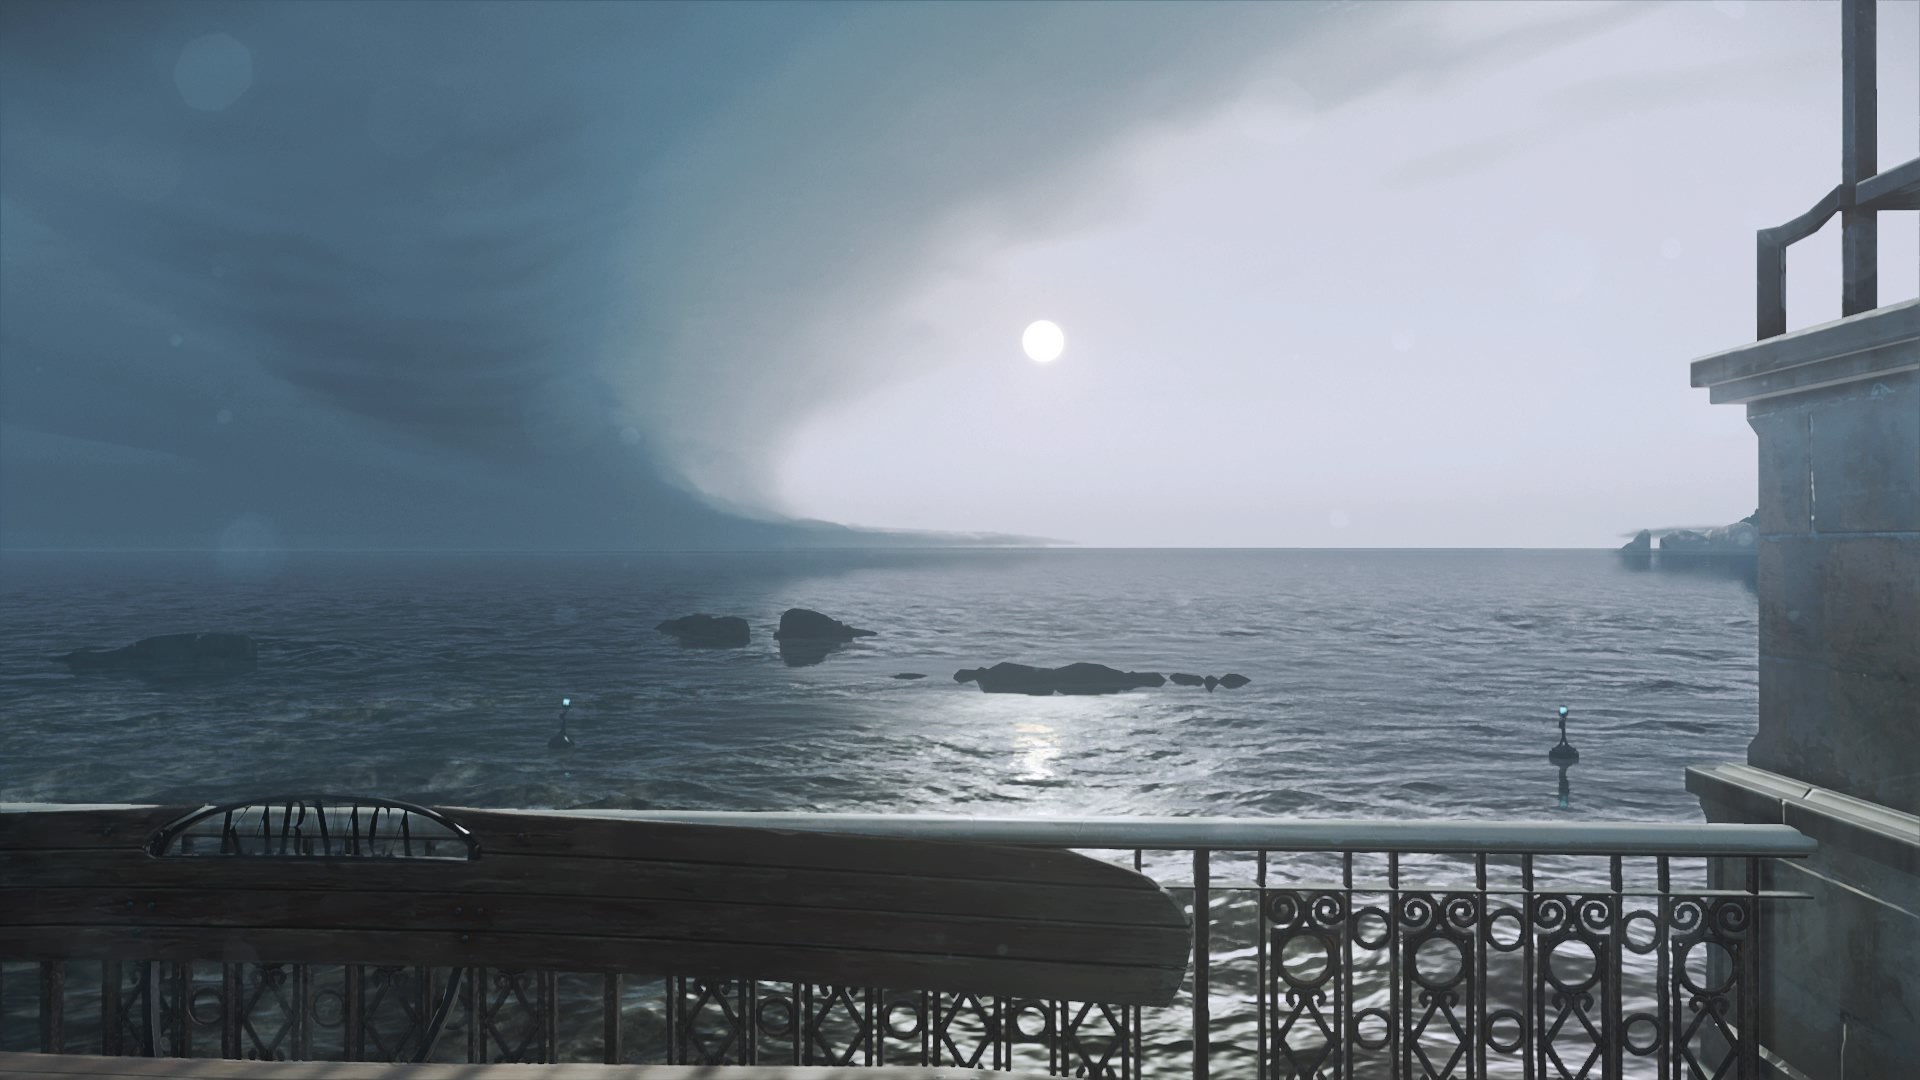 General 1920x1080 karnaka dishonored 2 Dishonored Dunwall landscape clouds bench coast island steampunk